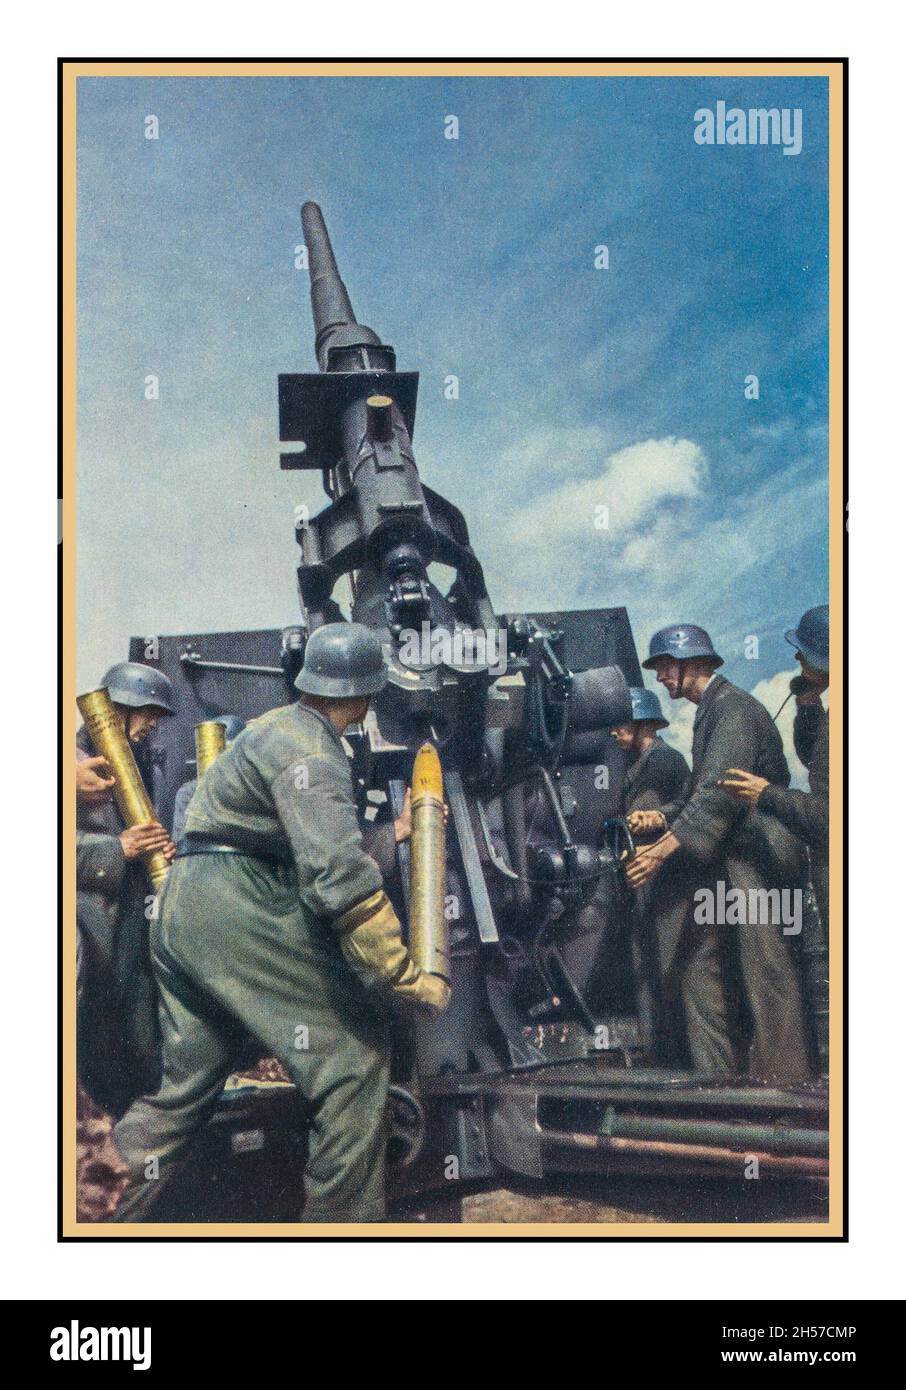 1943 Nazi propaganda colour photo showing a posed heavy anti-aircraft protection battery in operation during World War II Nazi Germany. With German cities being heavily bombed as a retribution for the London Blitz and other non military targets in the UK, Nazi propaganda Miniister Goebbels needed to try and bolster German public confidence with propaganda images of Nazi Germany air defence. Stock Photo